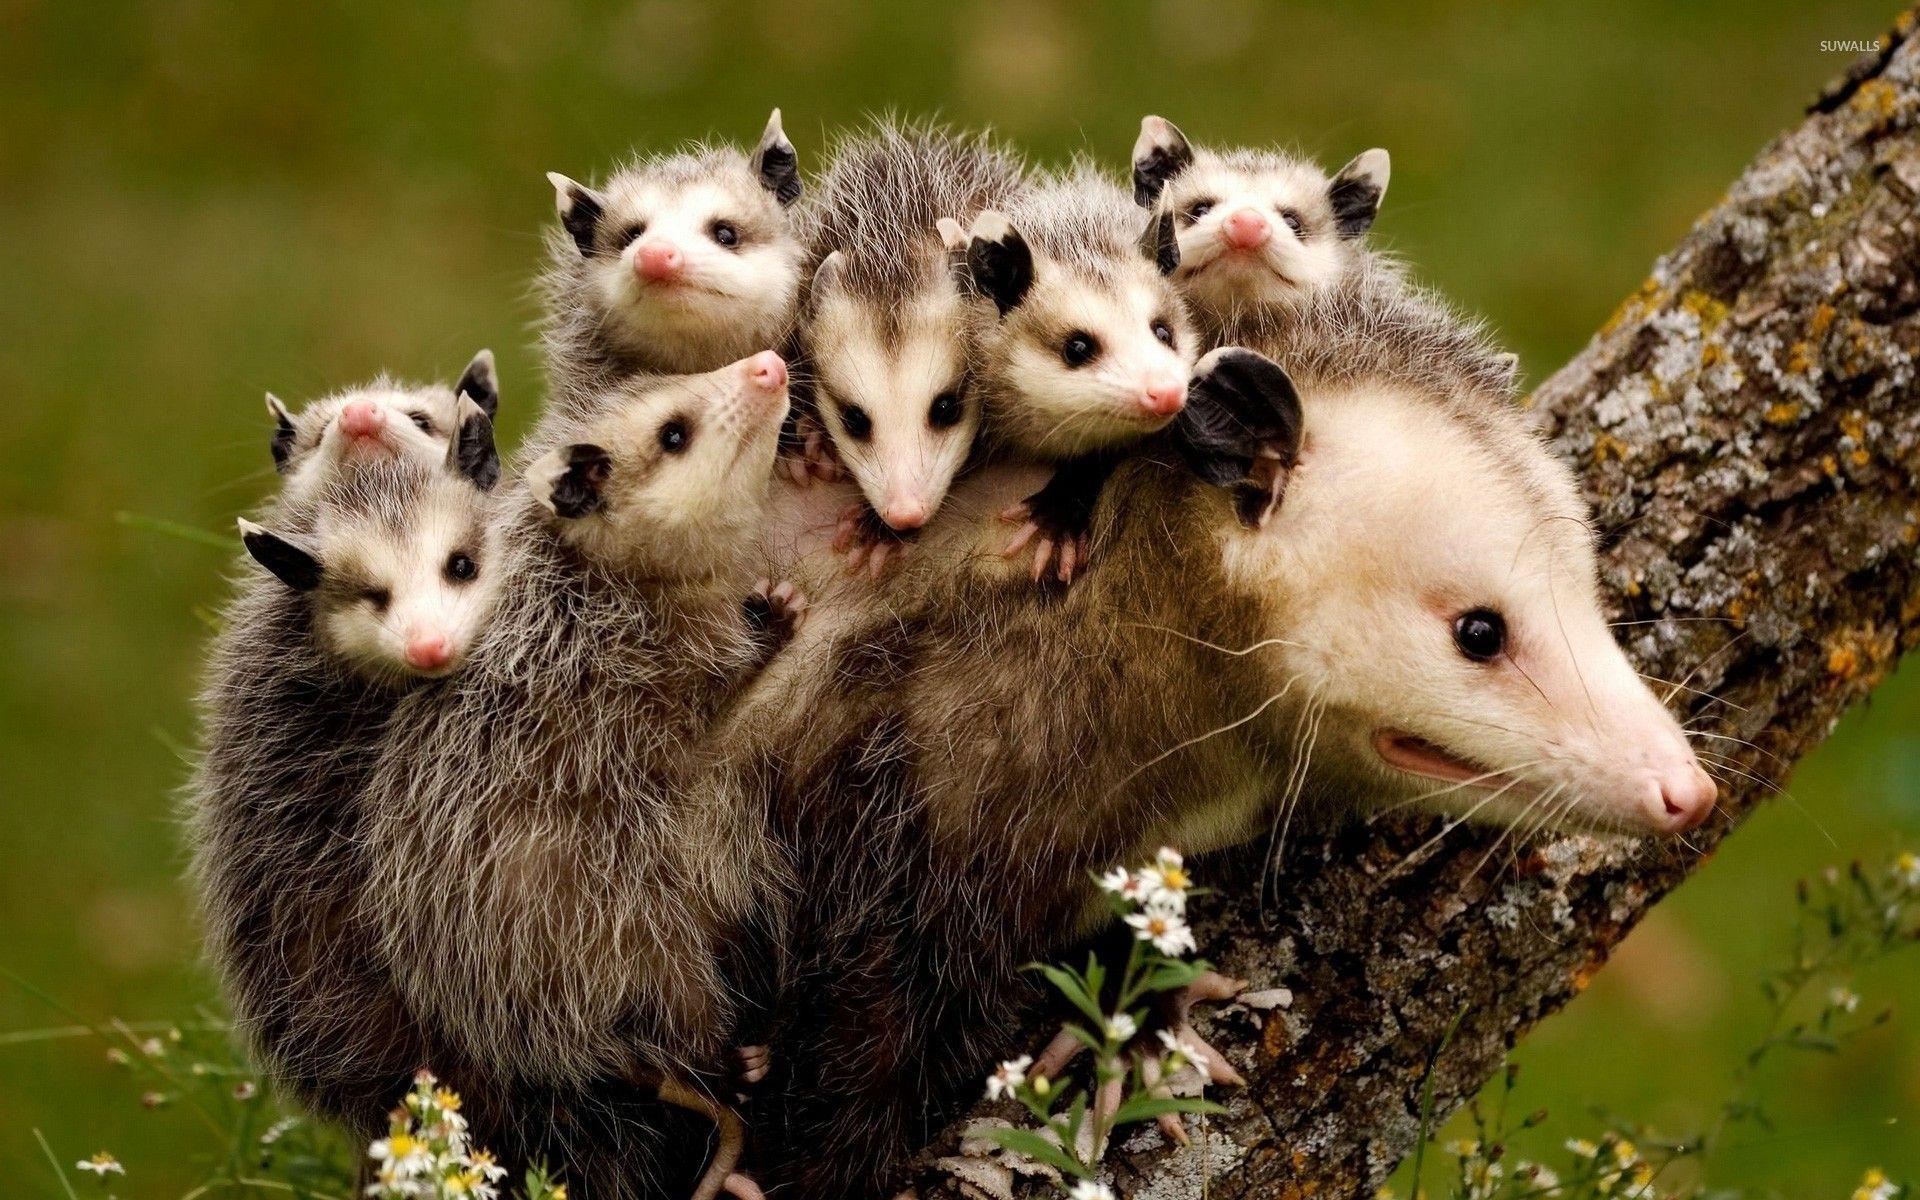 cute possum Wallpaper -- HD Wallpapers of cute possums!:Amazon.co.uk:Appstore  for Android